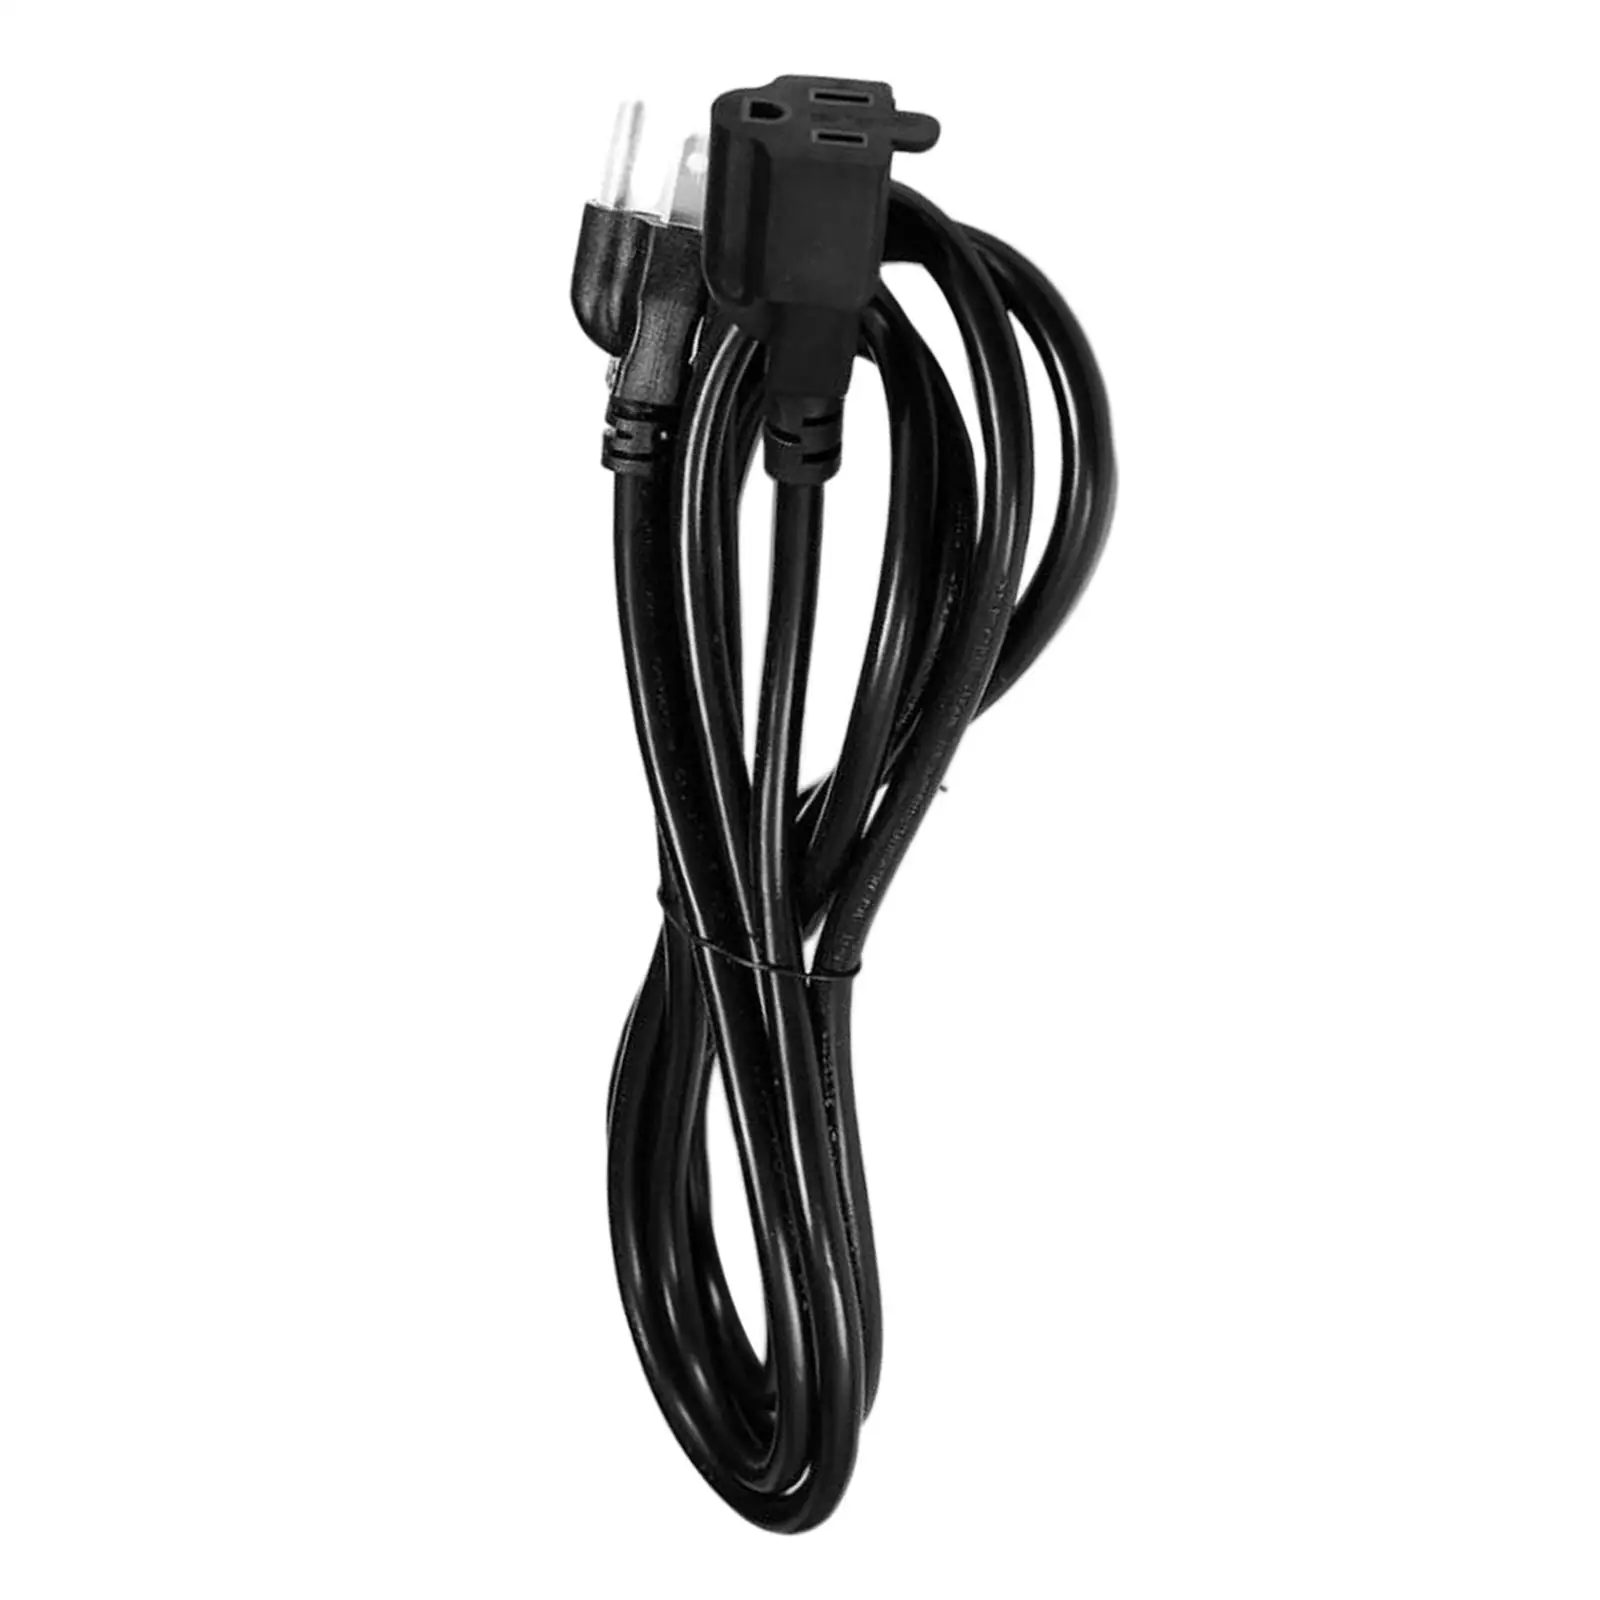 US 3 Pin Connector to 5-15R Power Cord Cable 11.8inch Durable  cessories Repl ement